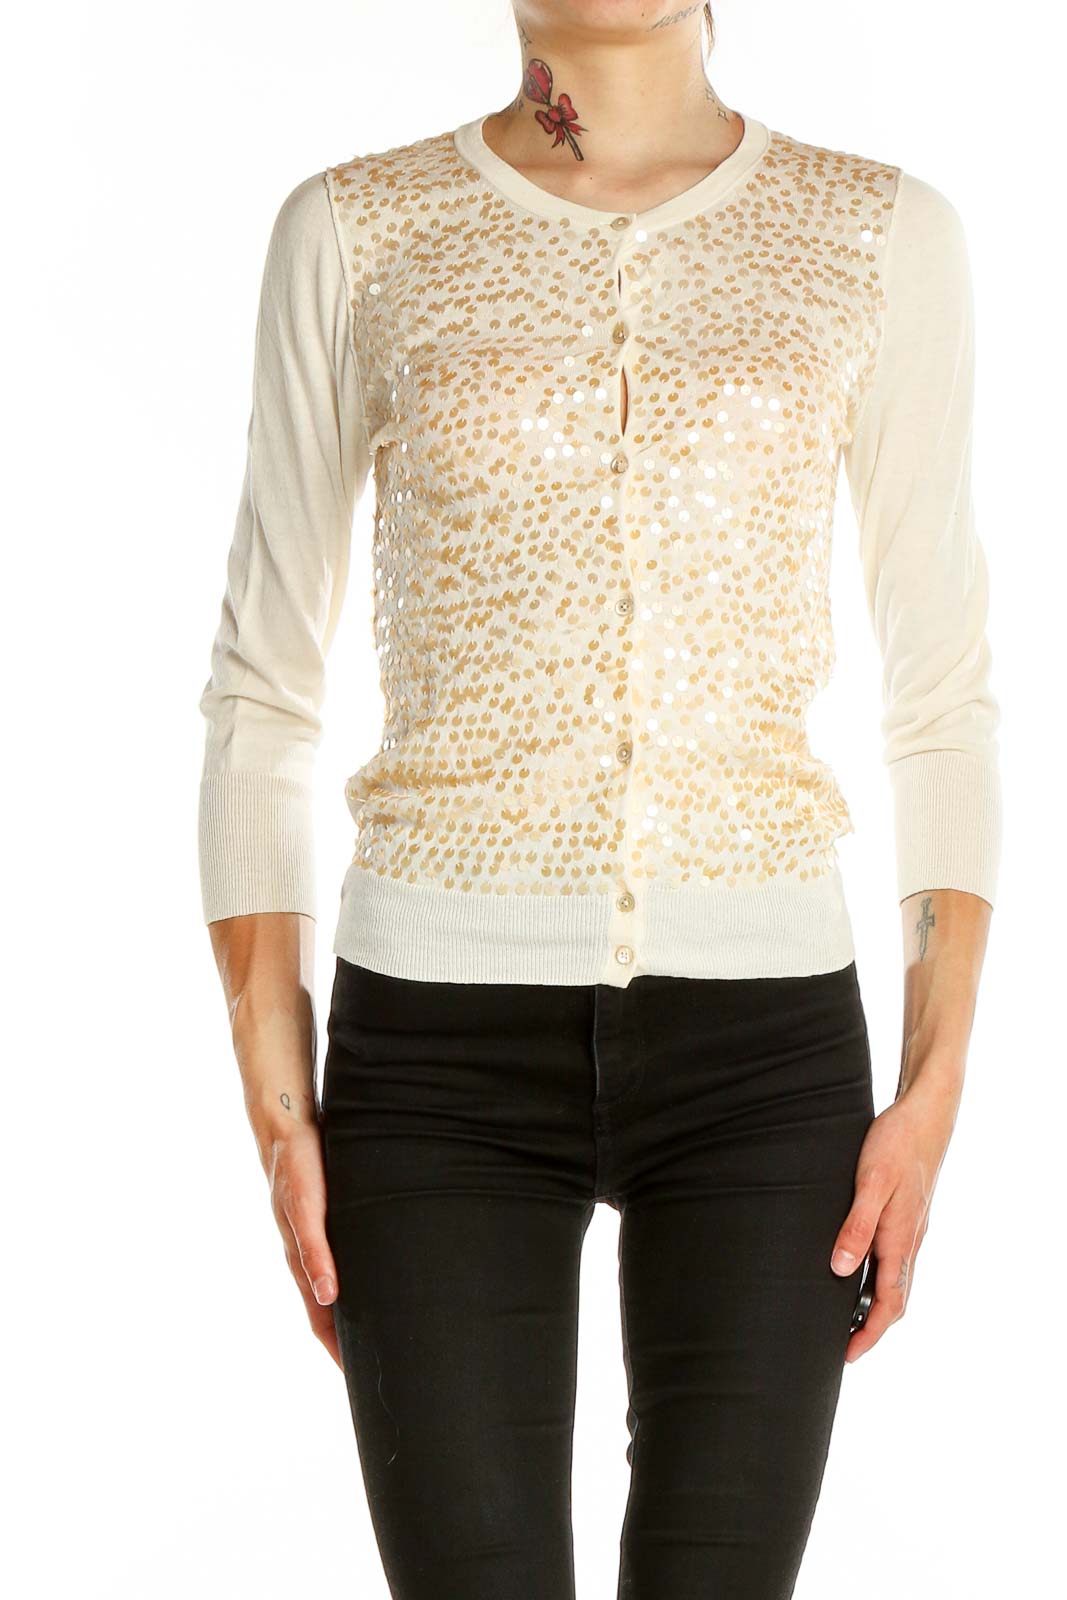 White Sequin Cardigan Front